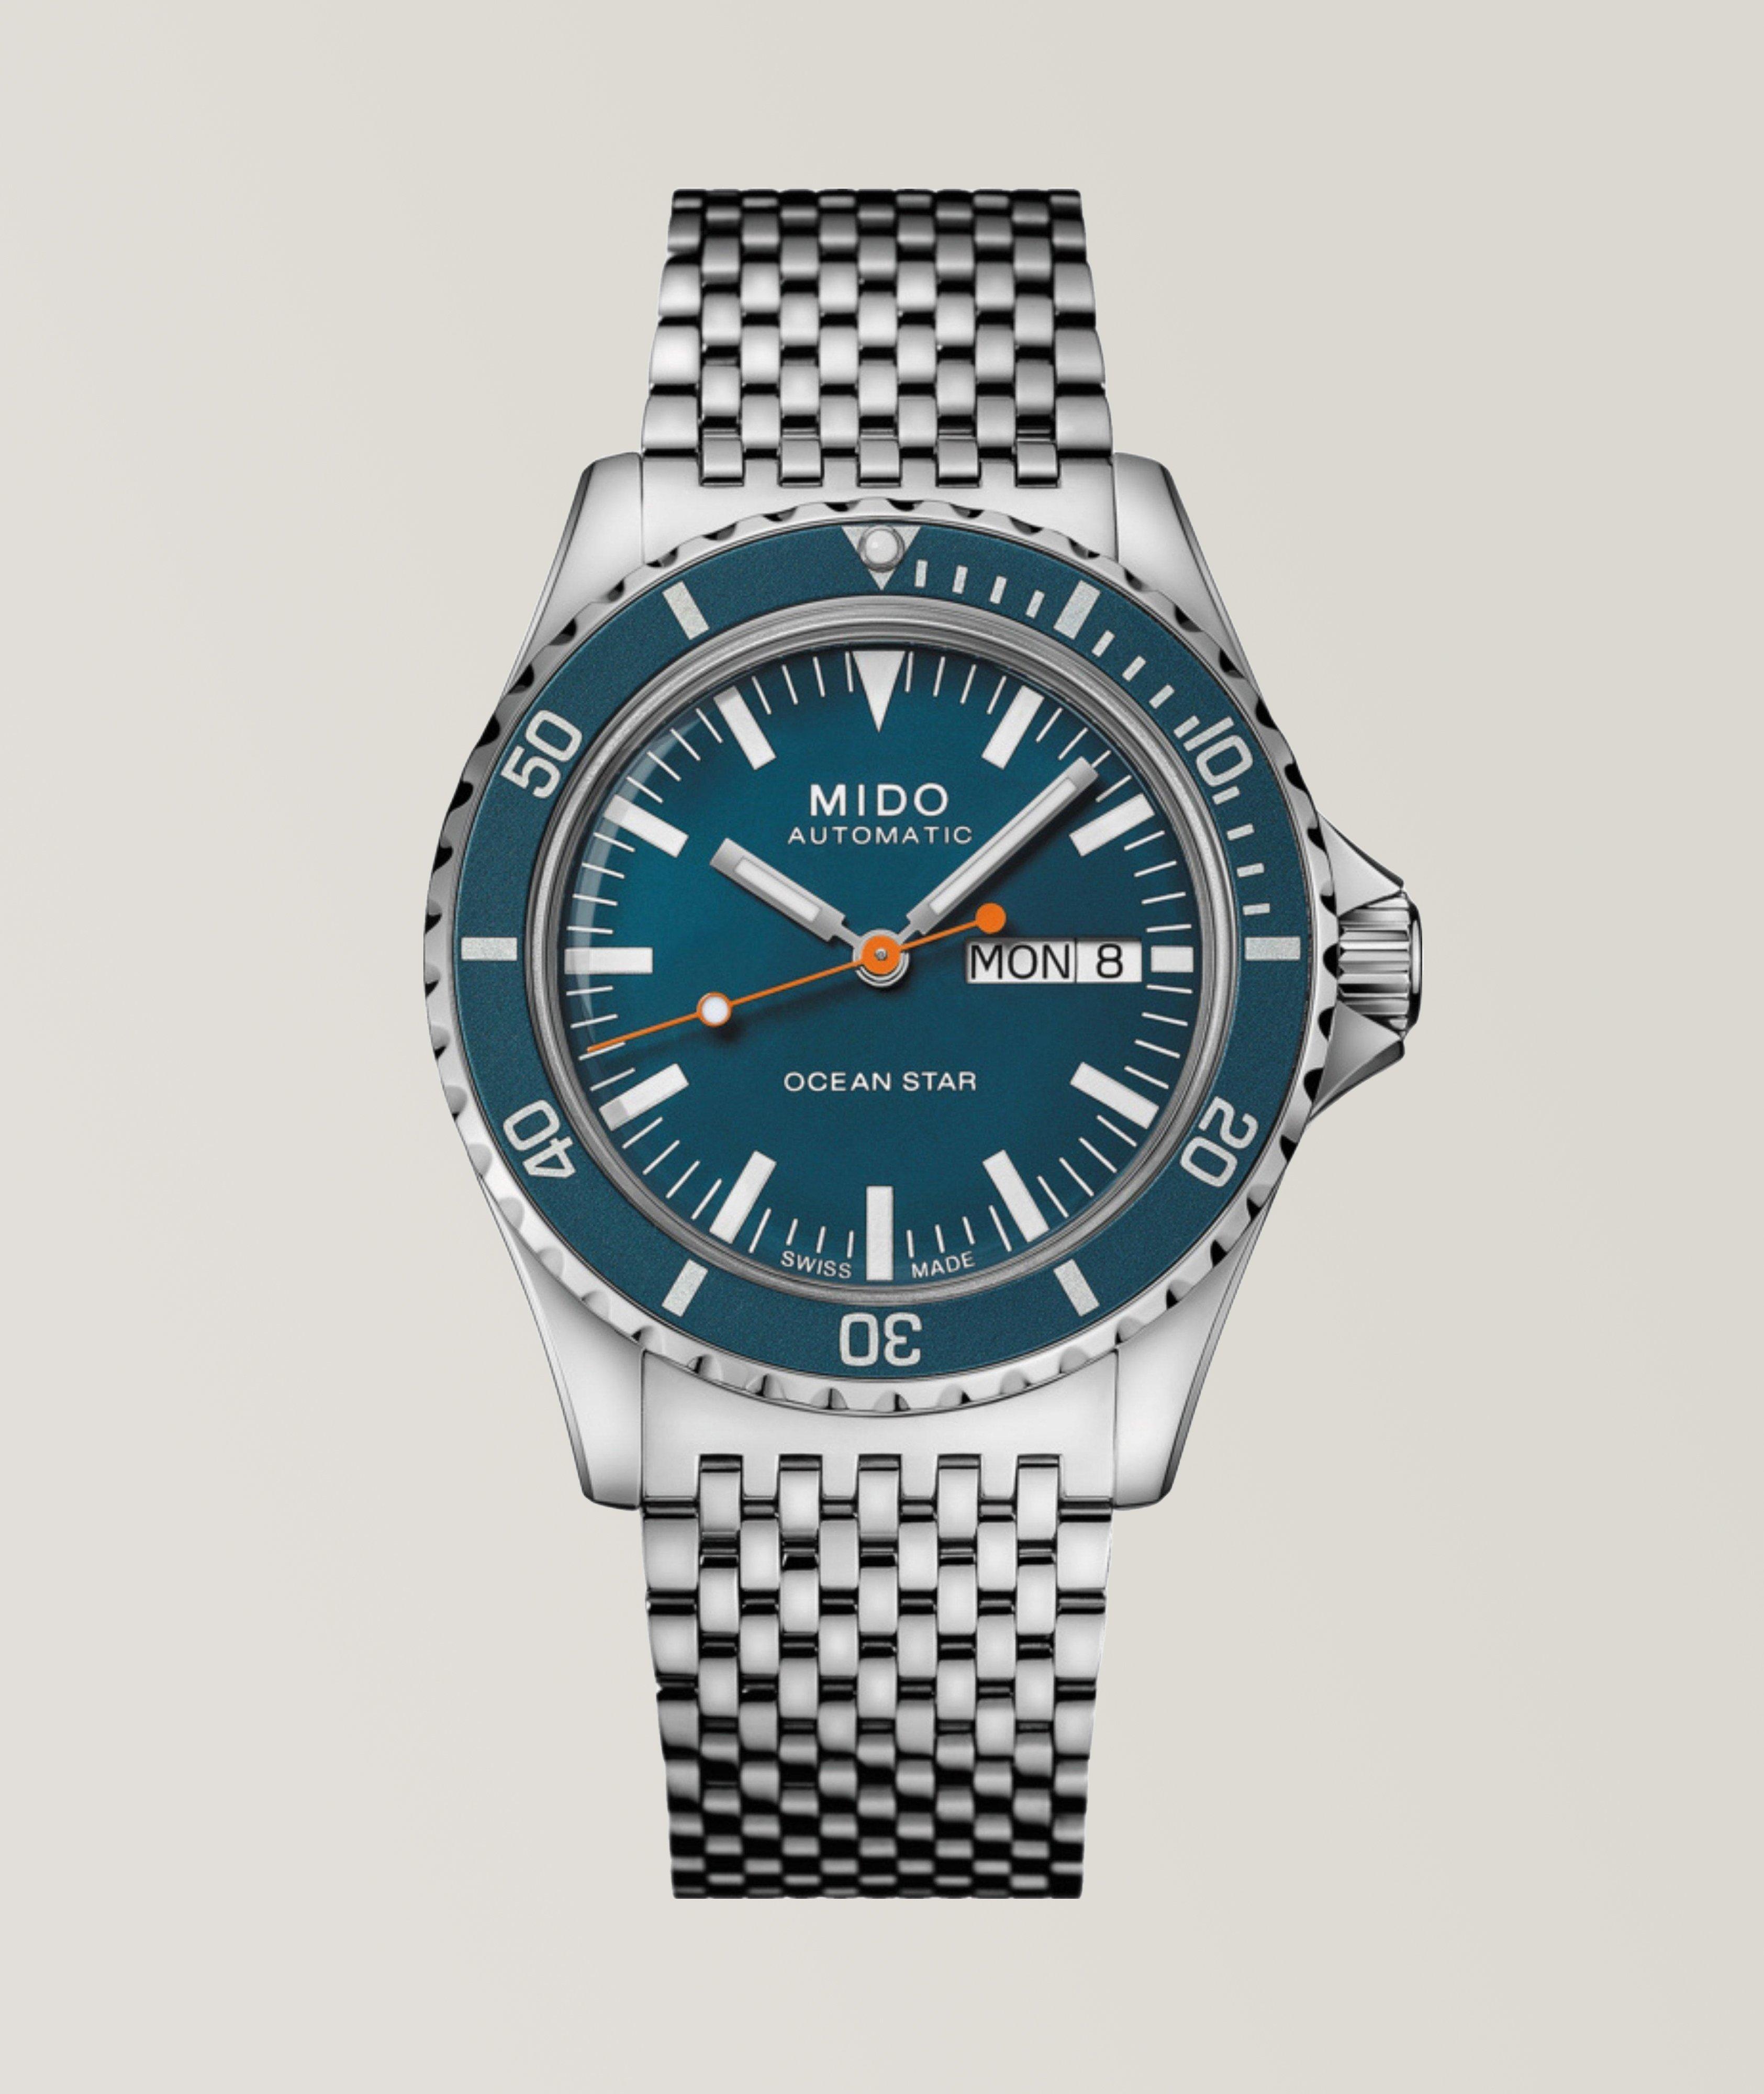 Montre hommage, collection Ocean Star image 0